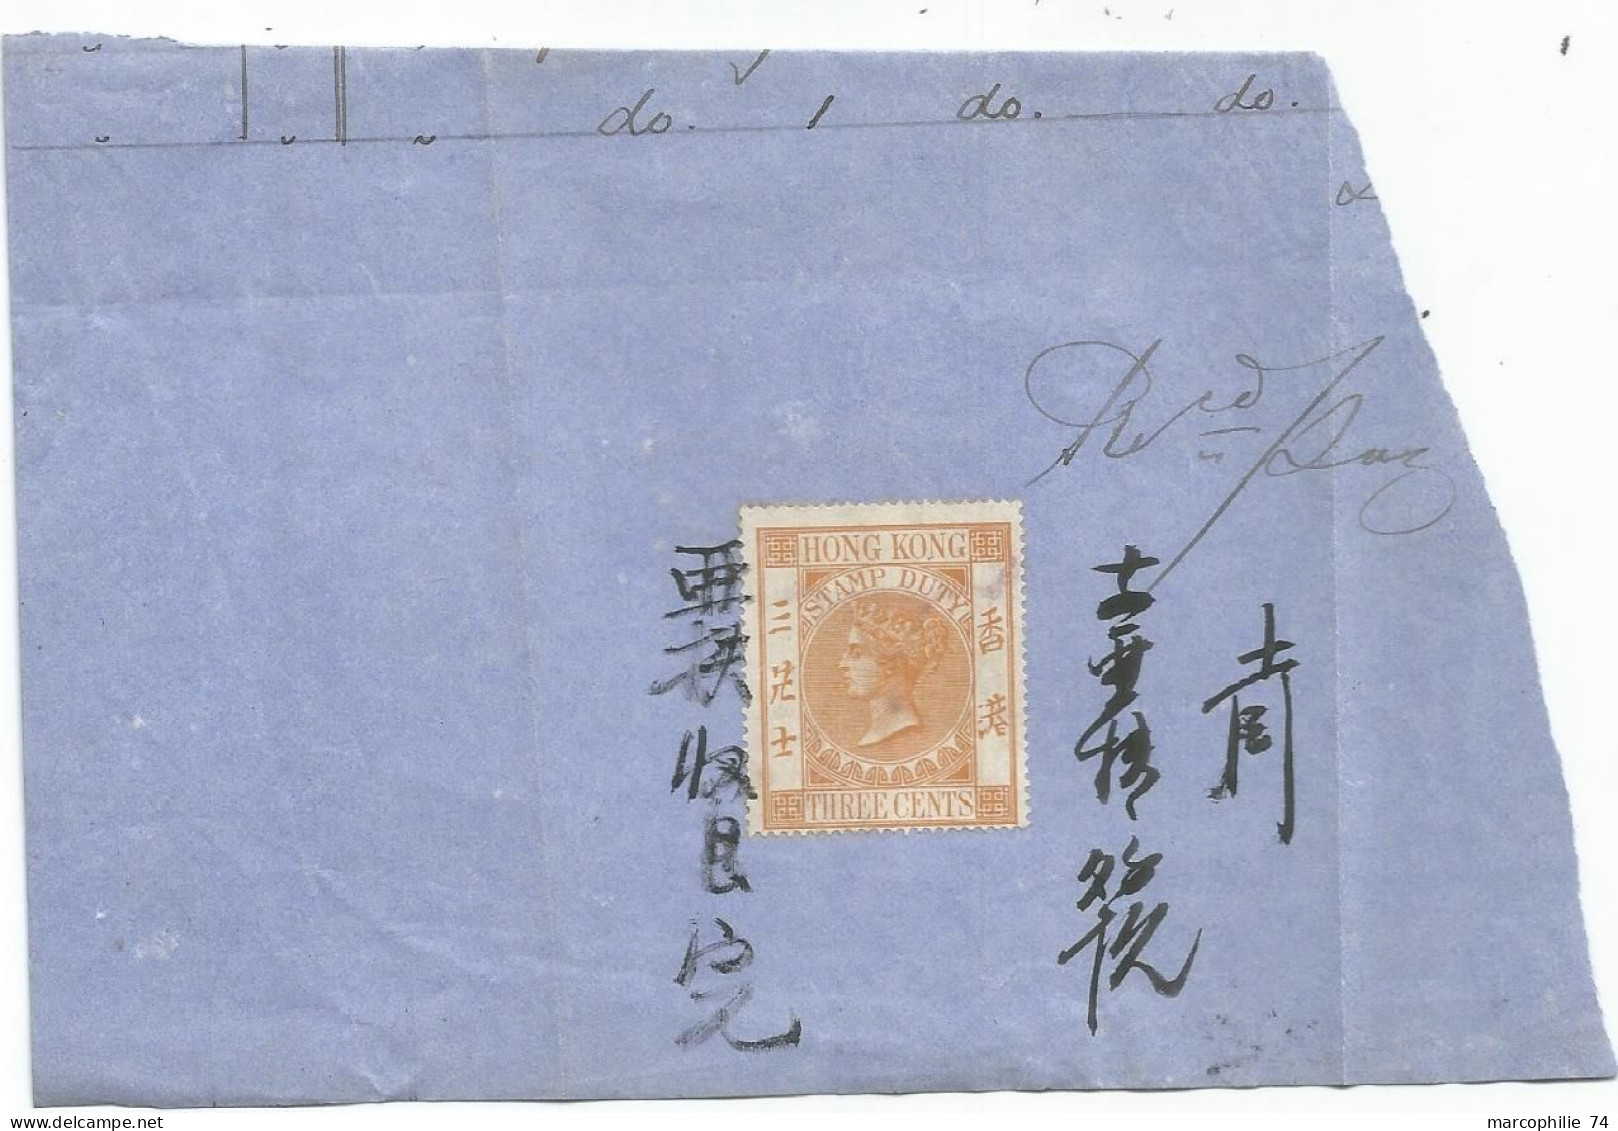 HONK KONG THREE CENTS FRAGMENT CHINA - Covers & Documents